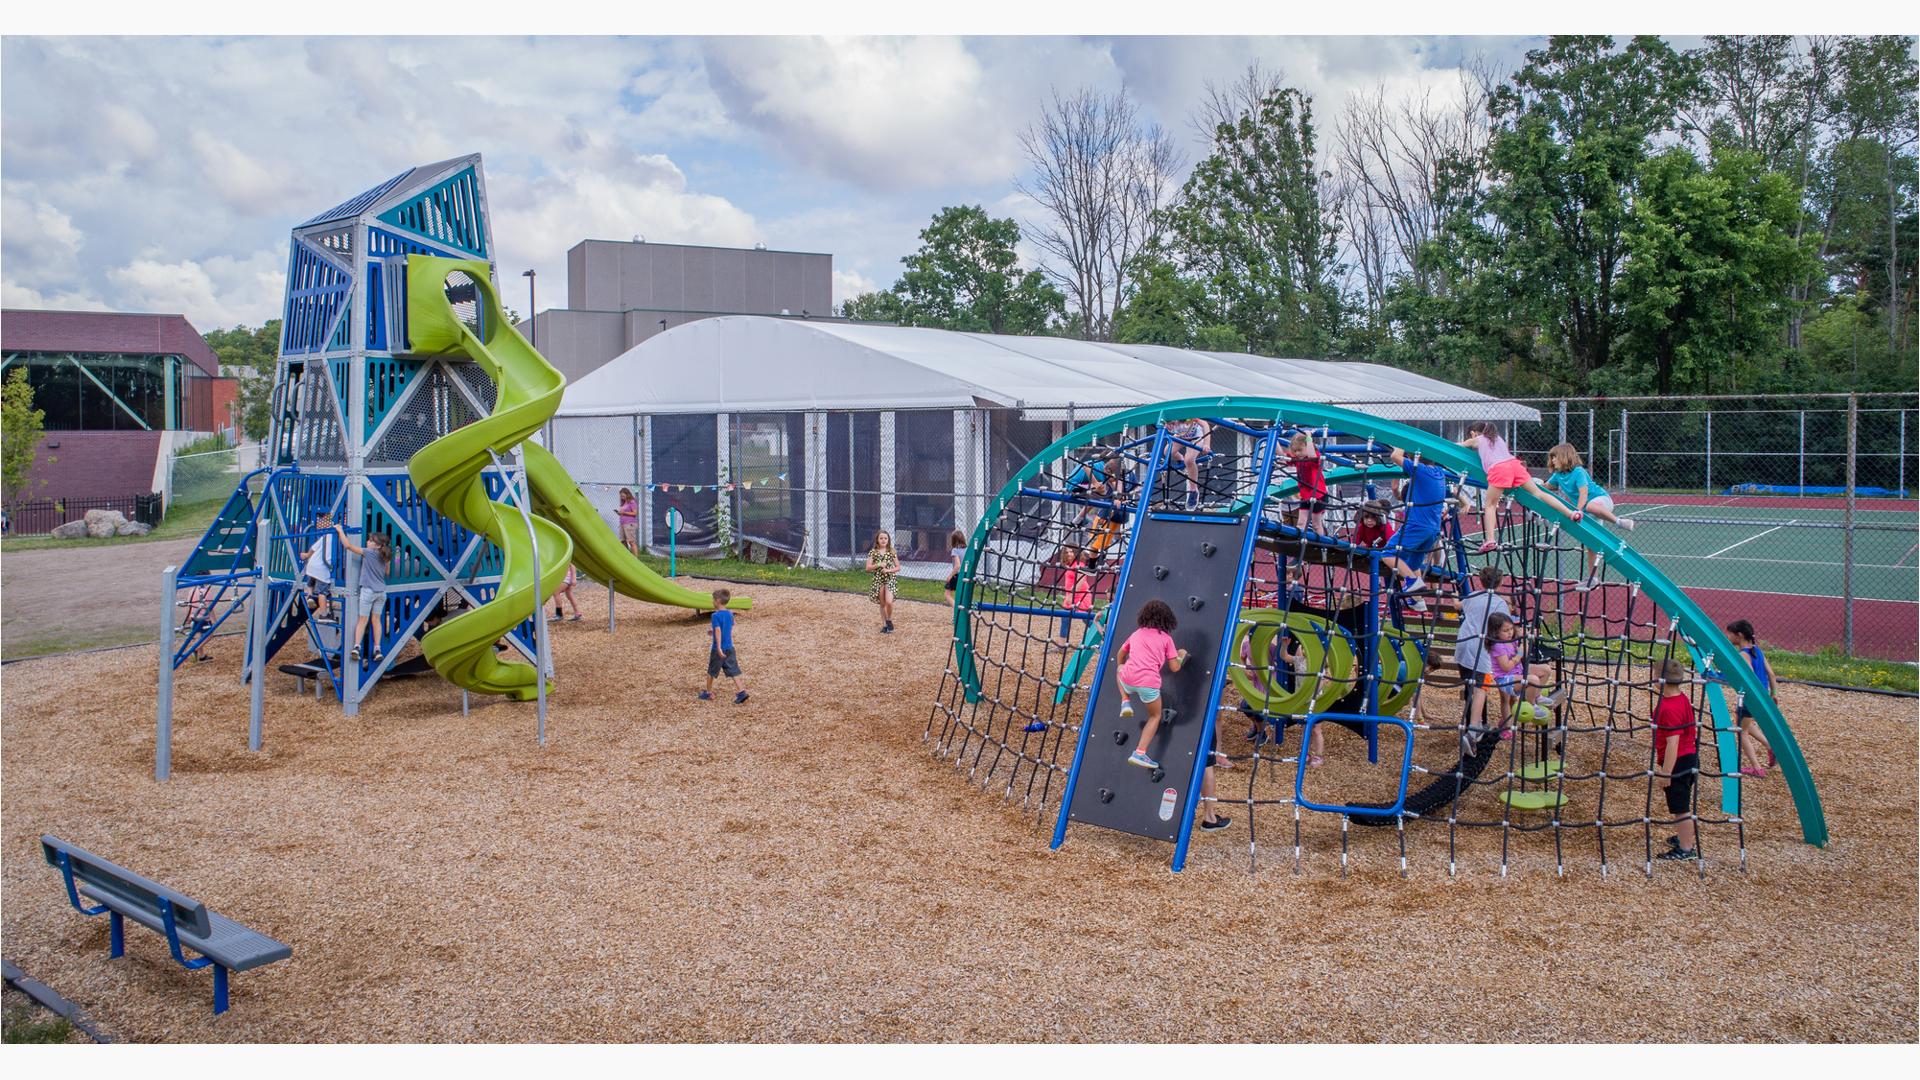 Louis S. Wolk JCC of Rochester
Rochester, NY is made up of a sky-high tower and playground nets. It also features the Double Swoosh Slide® and WhooshWinder® Slide, a Crab Trap®  and O-Zone® ring climber.